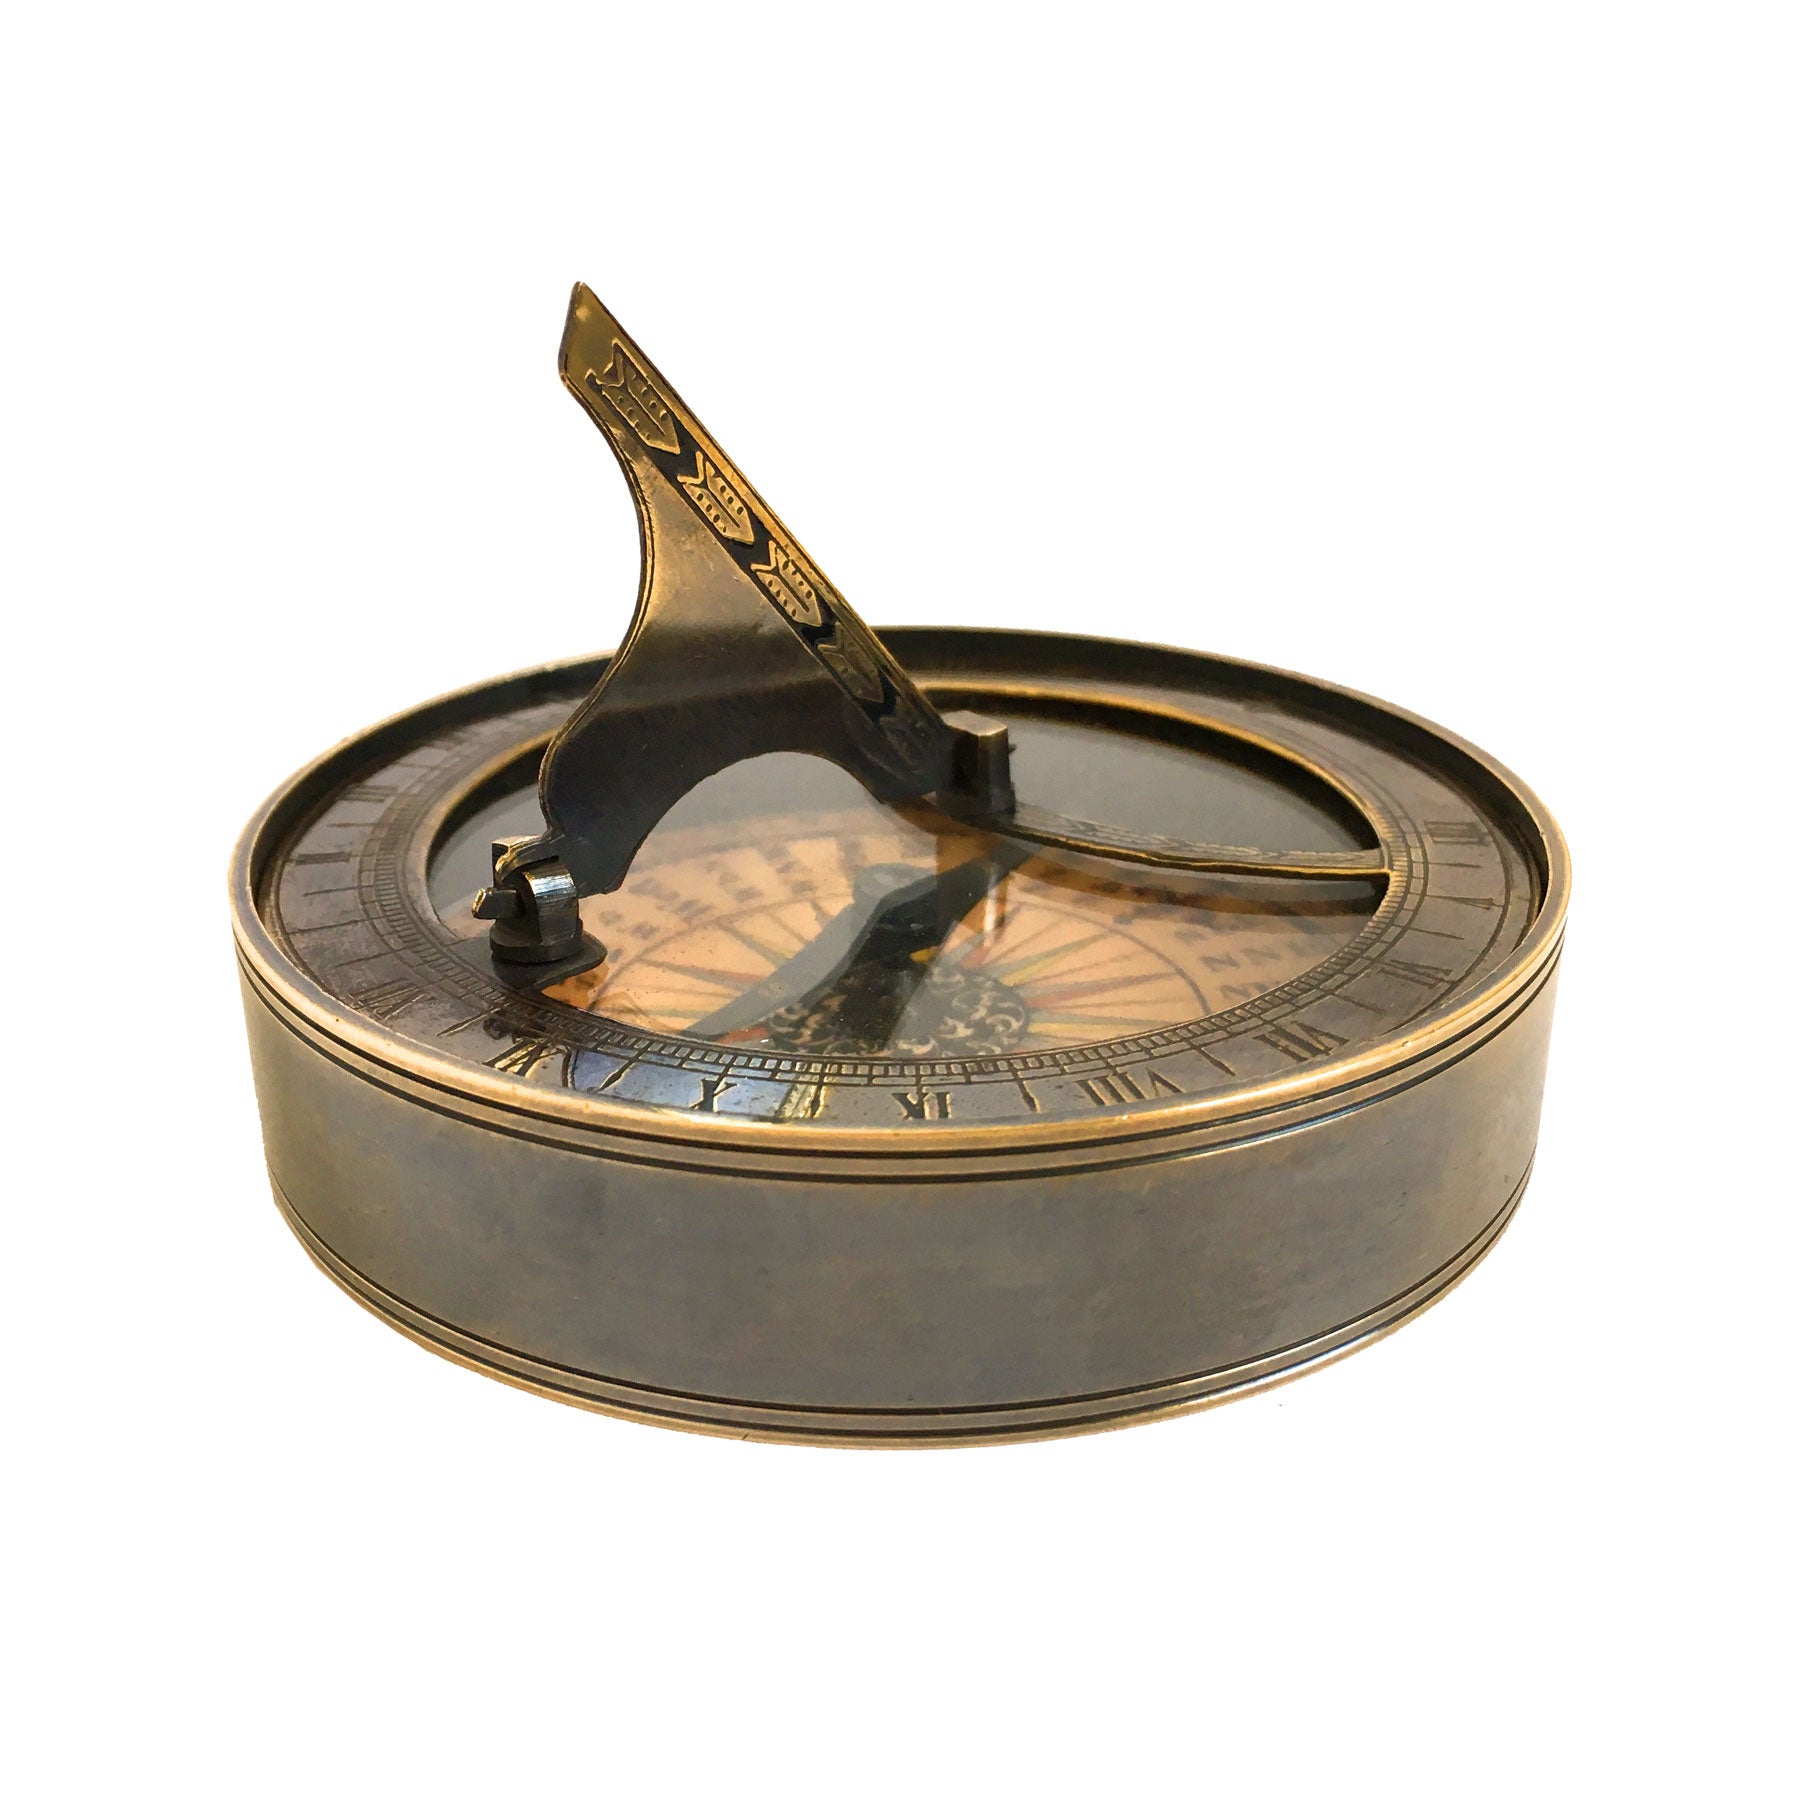 Antique & Vintage Reproductions - Compasses & Sundials – Curiosa -  Purveyors of Extraordinary Things